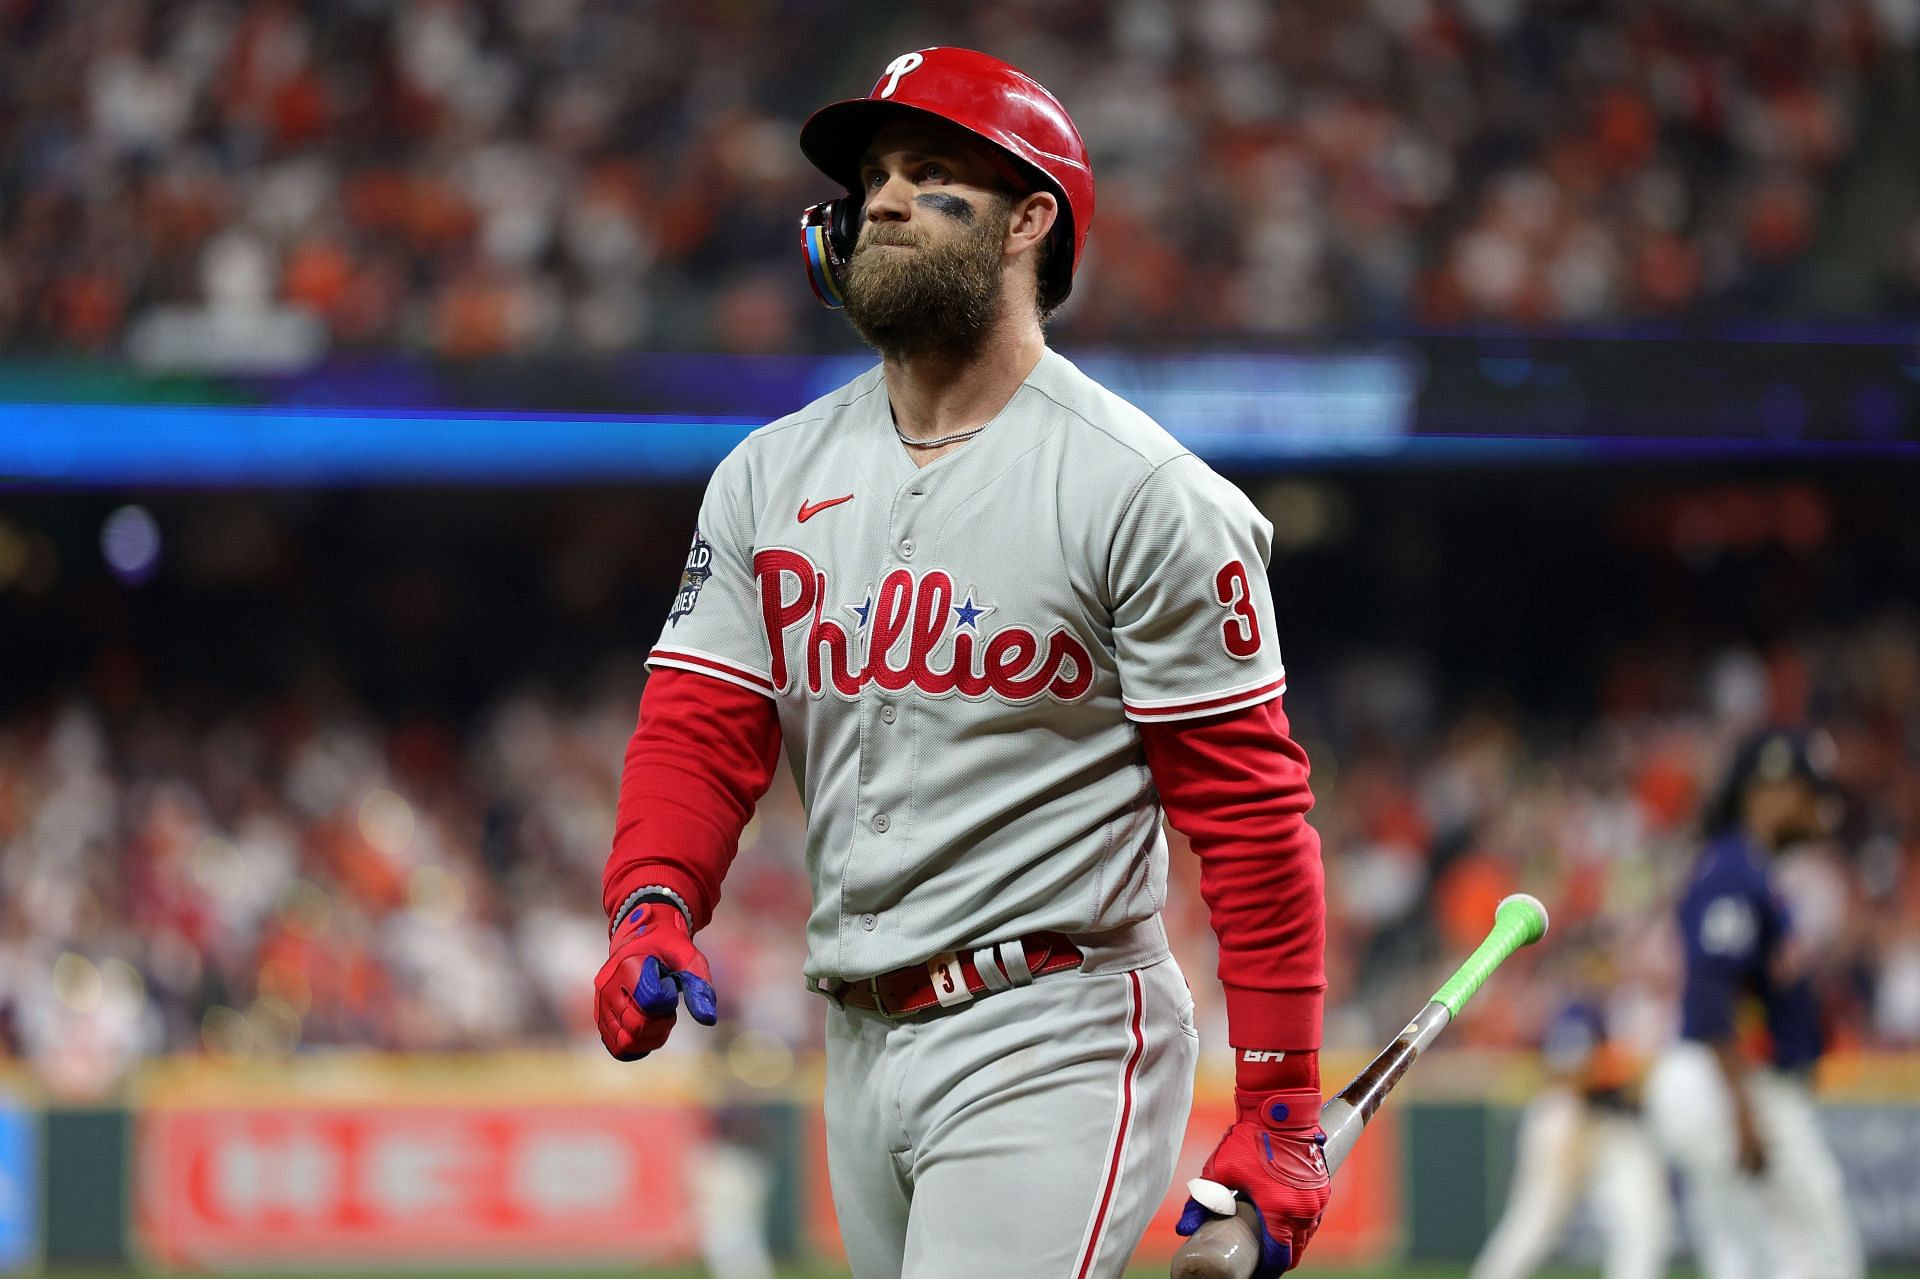 Where does Bryce Harper's career stats rank him among the best MLB hitters  of all time?